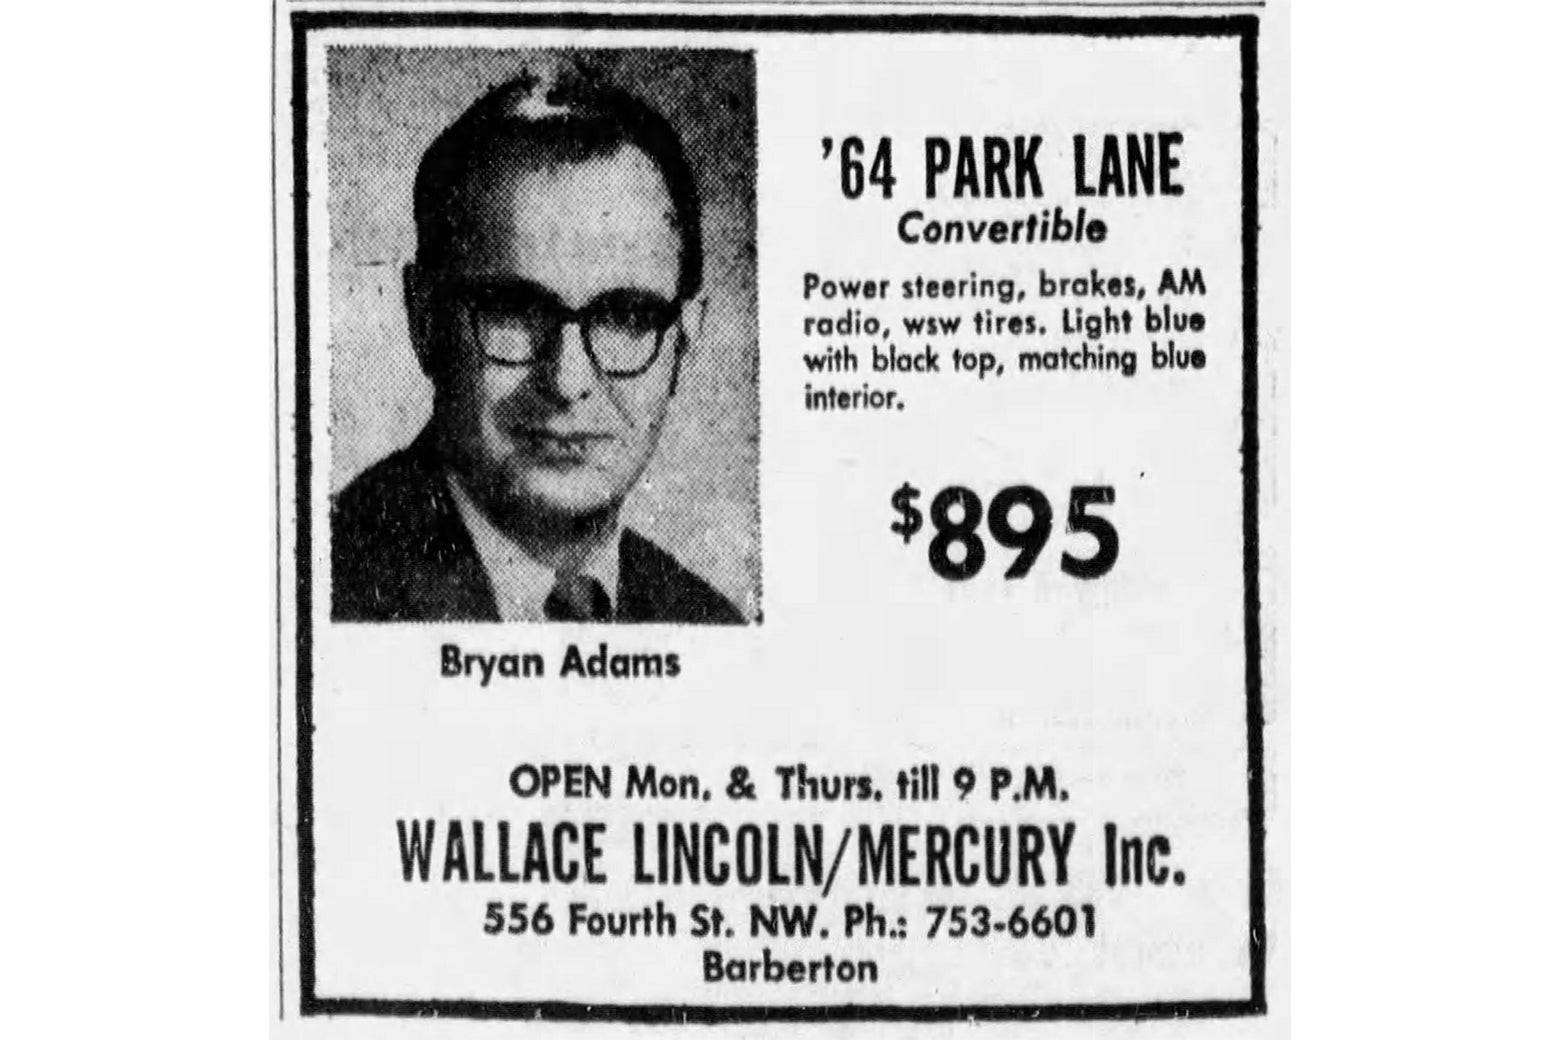 A newspaper ad for the sale of a '64 Park Lane convertible from a dealer named Bryan Adams, who is pictured in extremely uncool clothing and glasses.